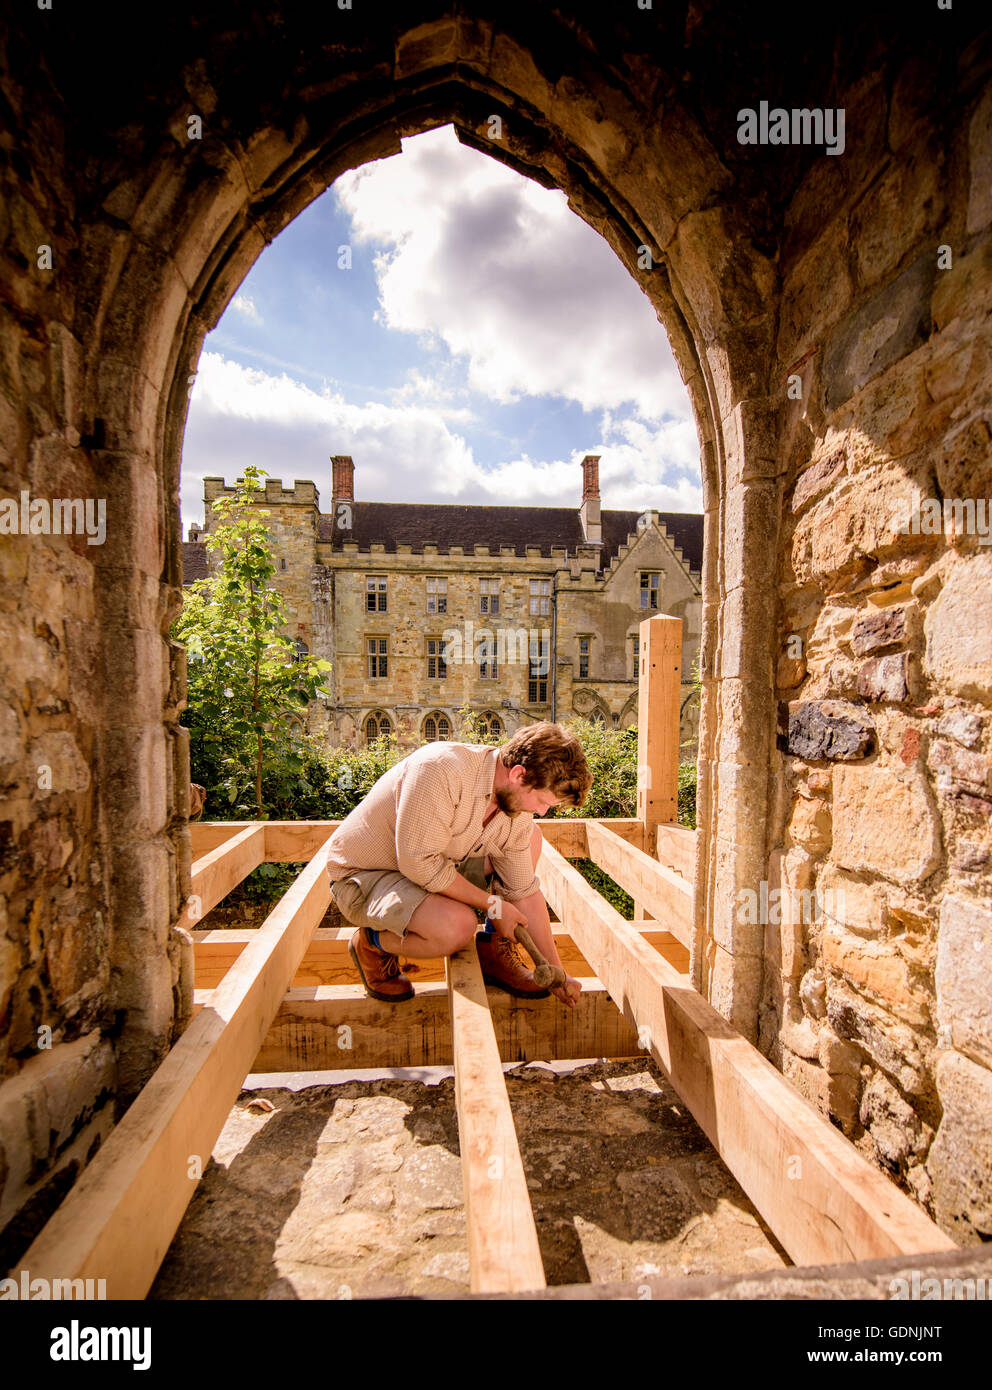 Preparations for the 950th anniversary year of the Battle of Hastings near completion at Battle Abbey with English Heritage. A carpenter installs new oak-framed steps allowing visitor access to the dormitory range for the first time. Stock Photo